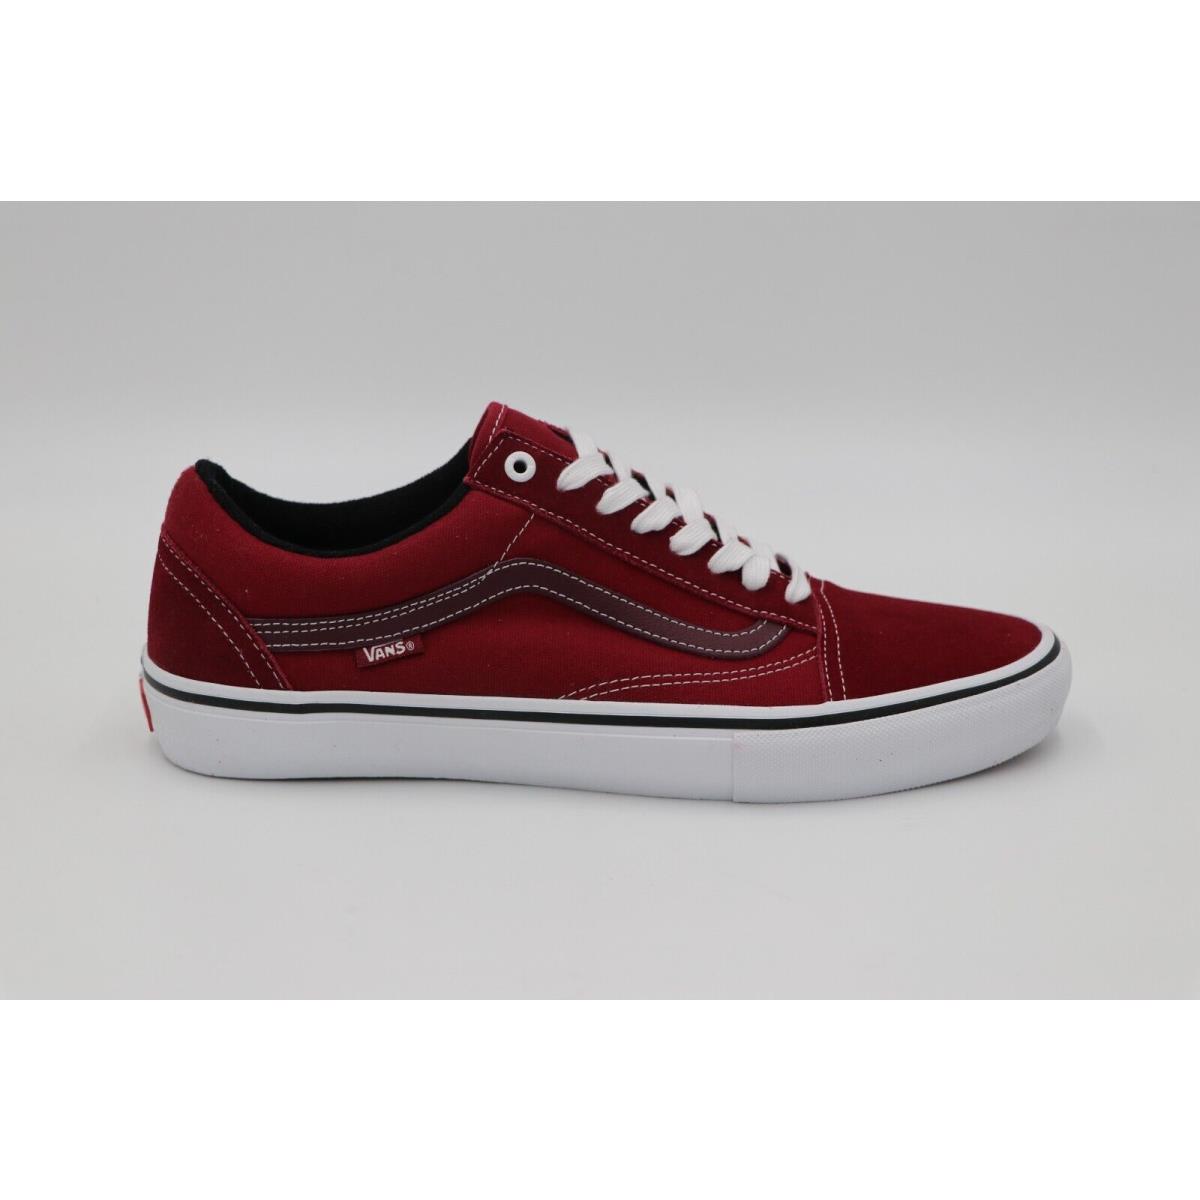 Old Skool Pro Shoes - Vans Rumba Red/ThrWht